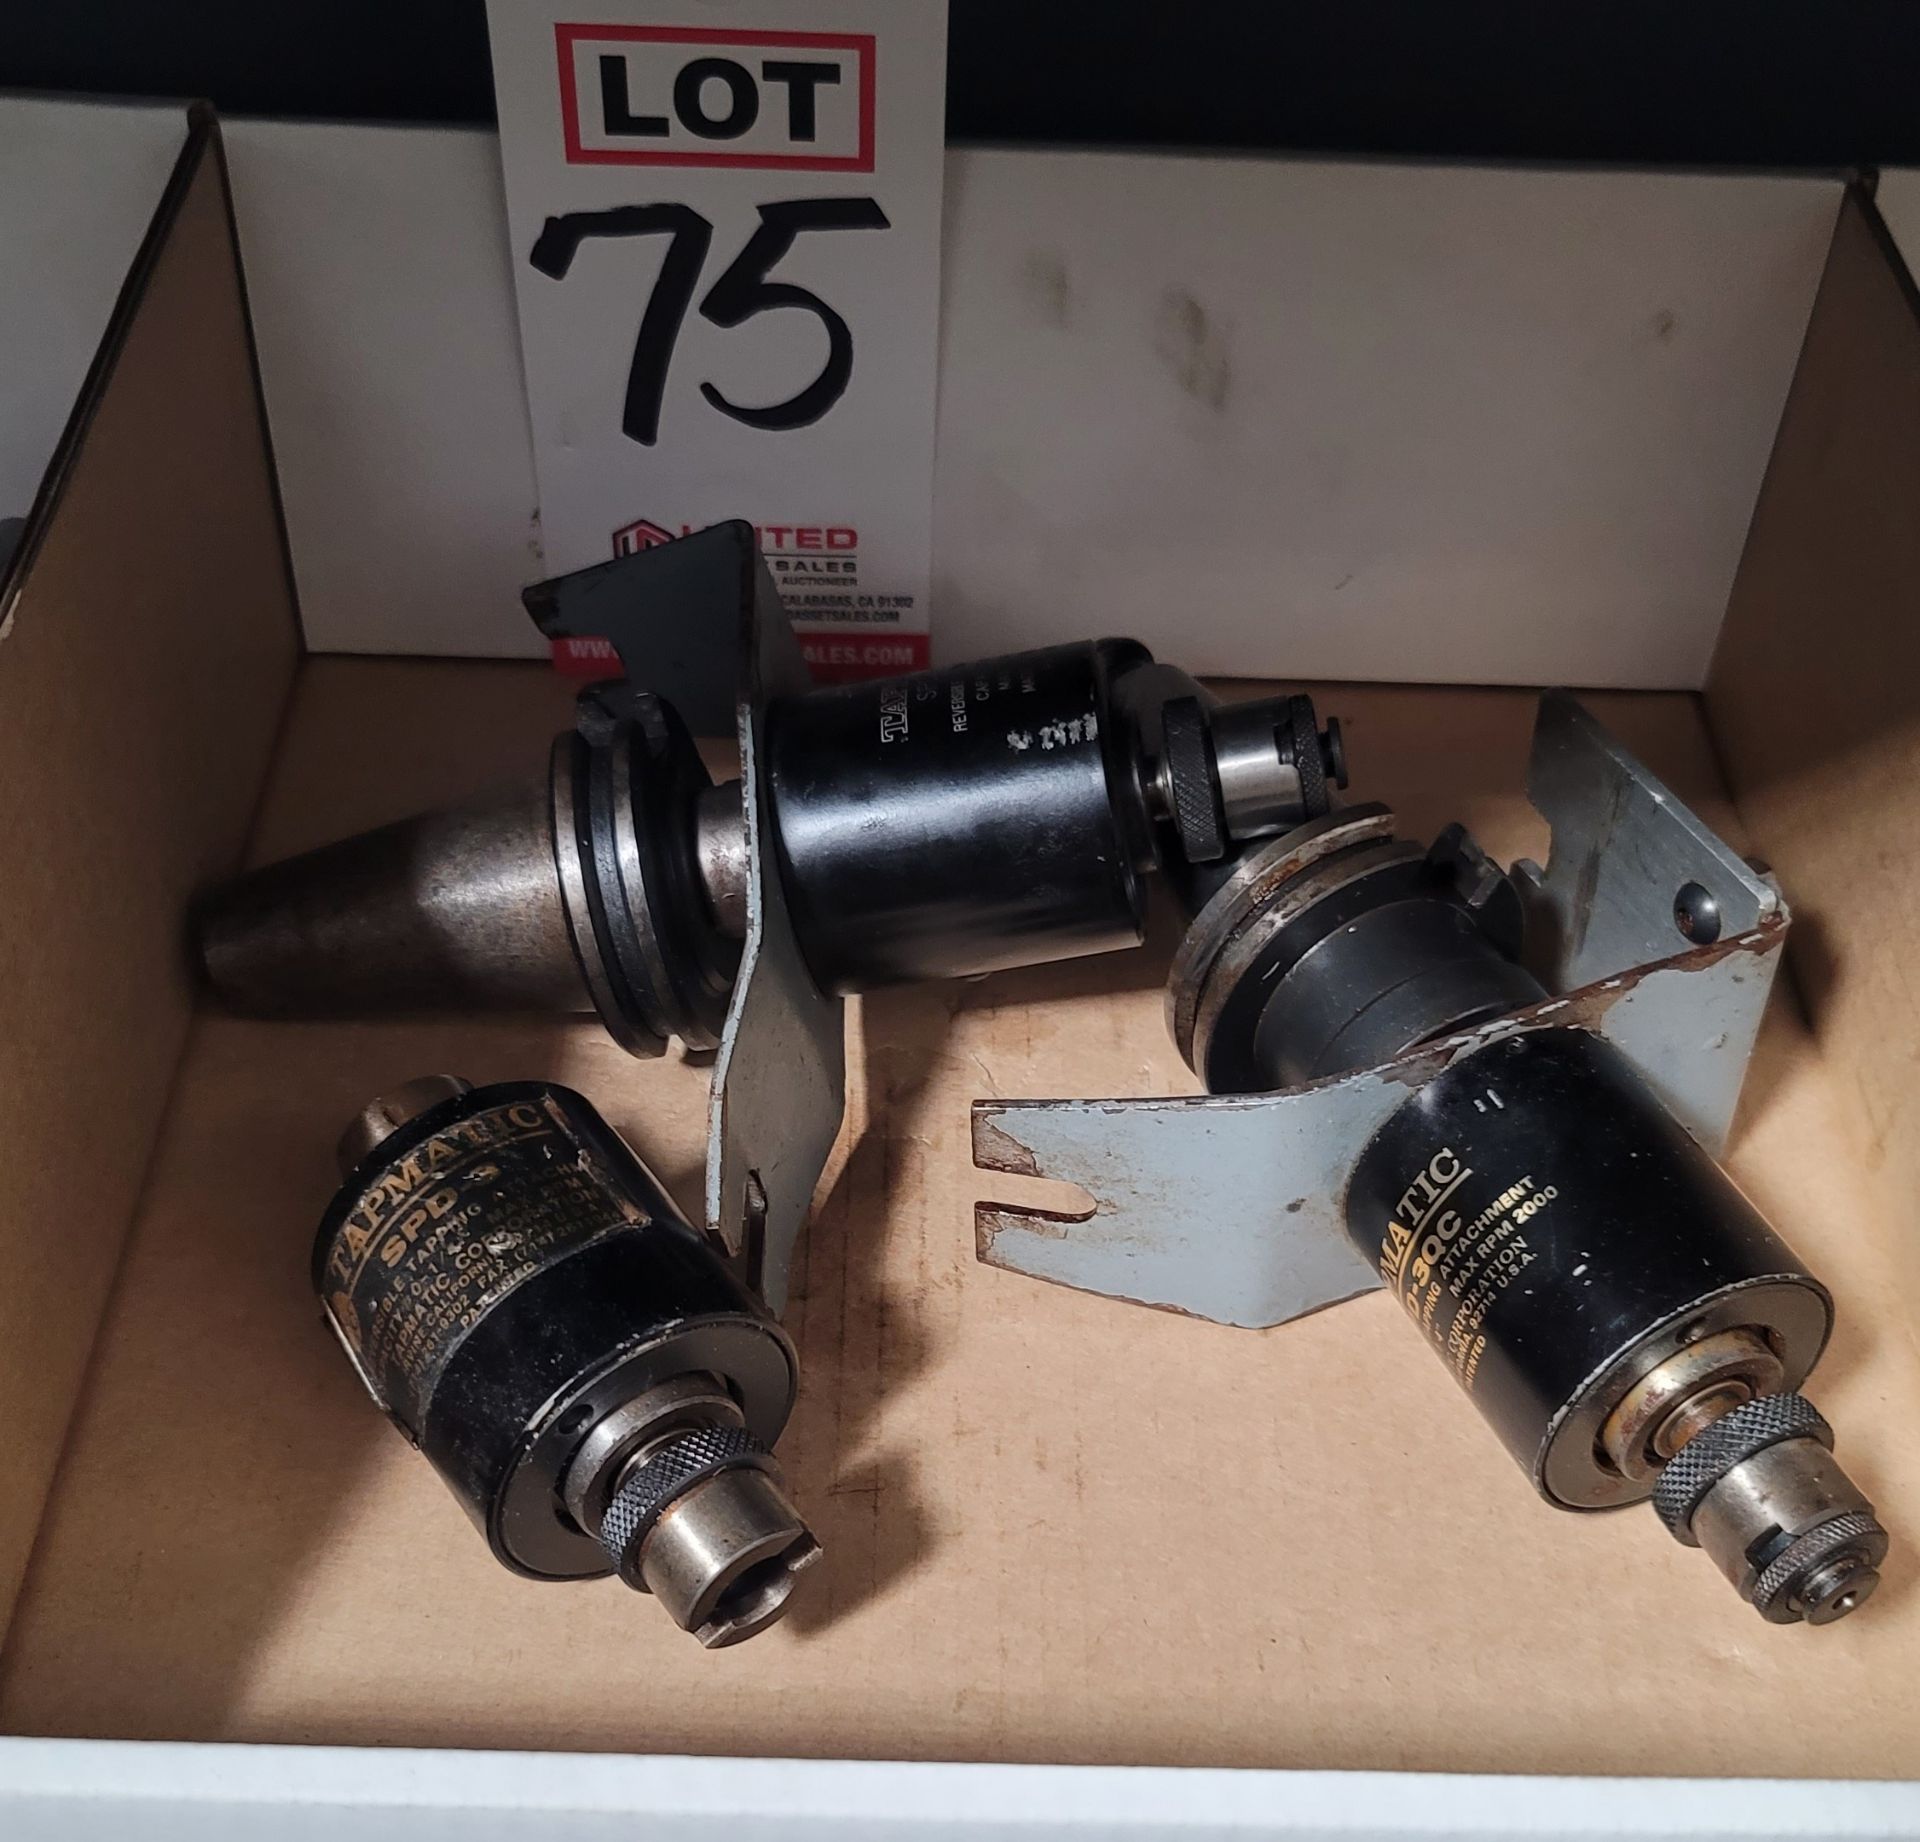 LOT - (3) TAPMATIC TAPPING HEADS: (1) SPD-3 AND (2) SPD-3QC W/ 40-TAPER TOOL HOLDERS